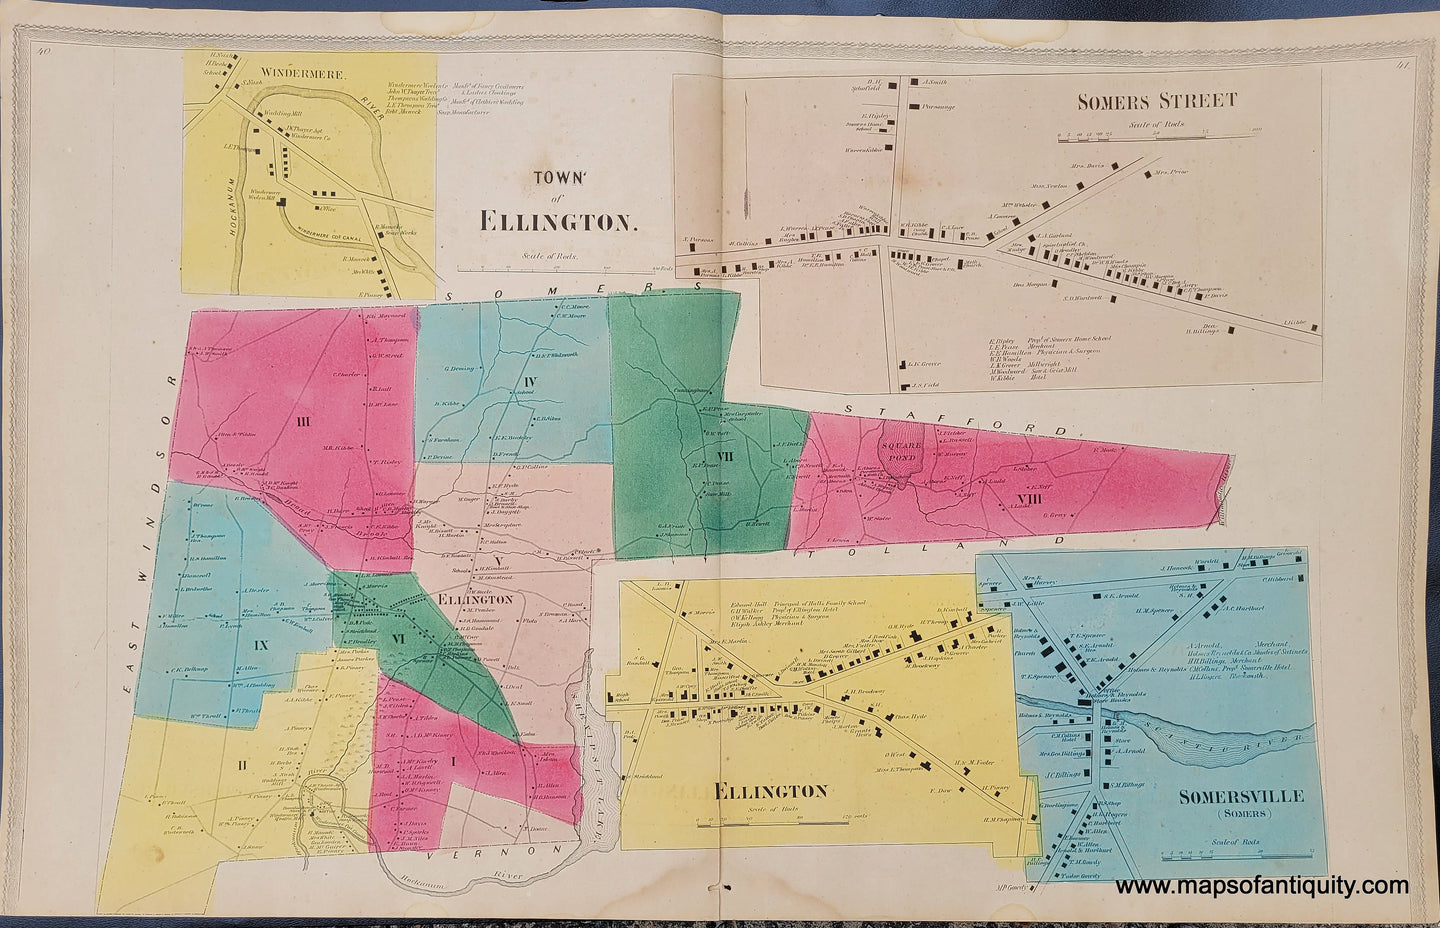 Antique-Hand-Colored-Map-Ellington-Windermere-Somersville-Somers-Street-CT-Connecticut-United-States-Northeast-1869-Gray/Keeney-Maps-Of-Antiquity